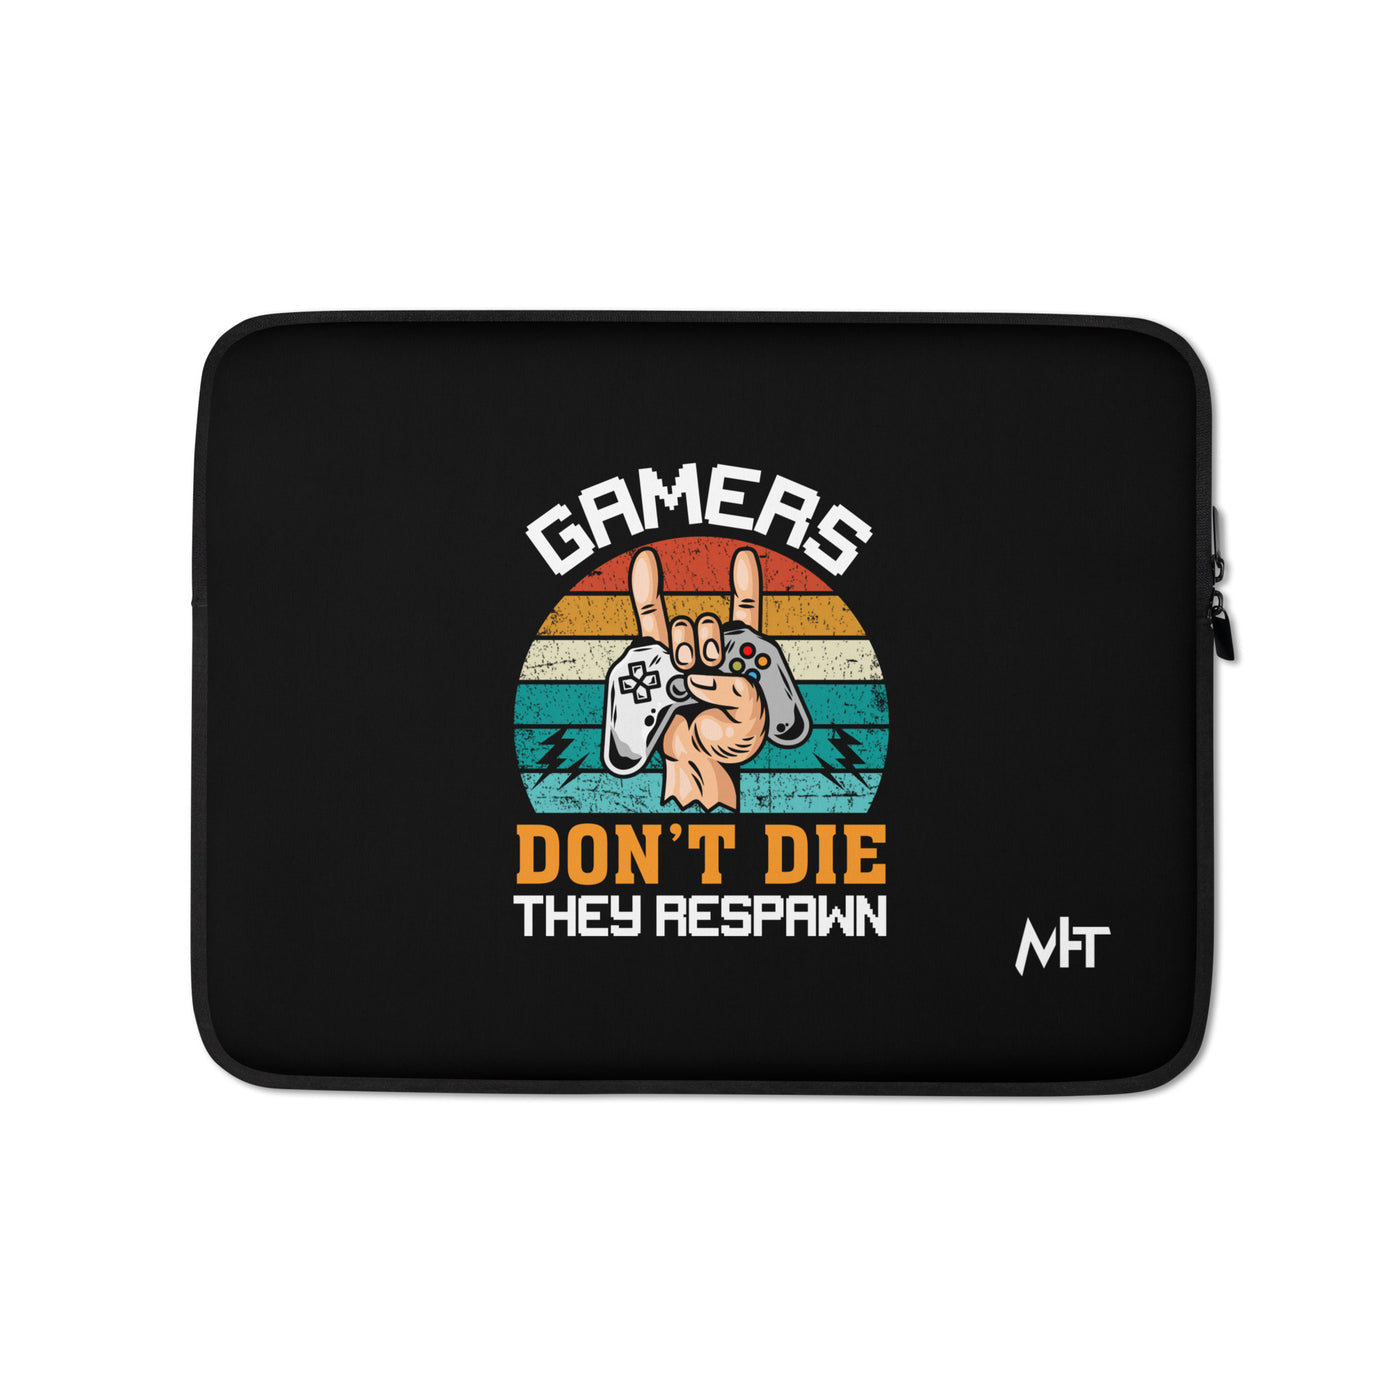 Gamers don't Die, they Respawn - Laptop Sleeve